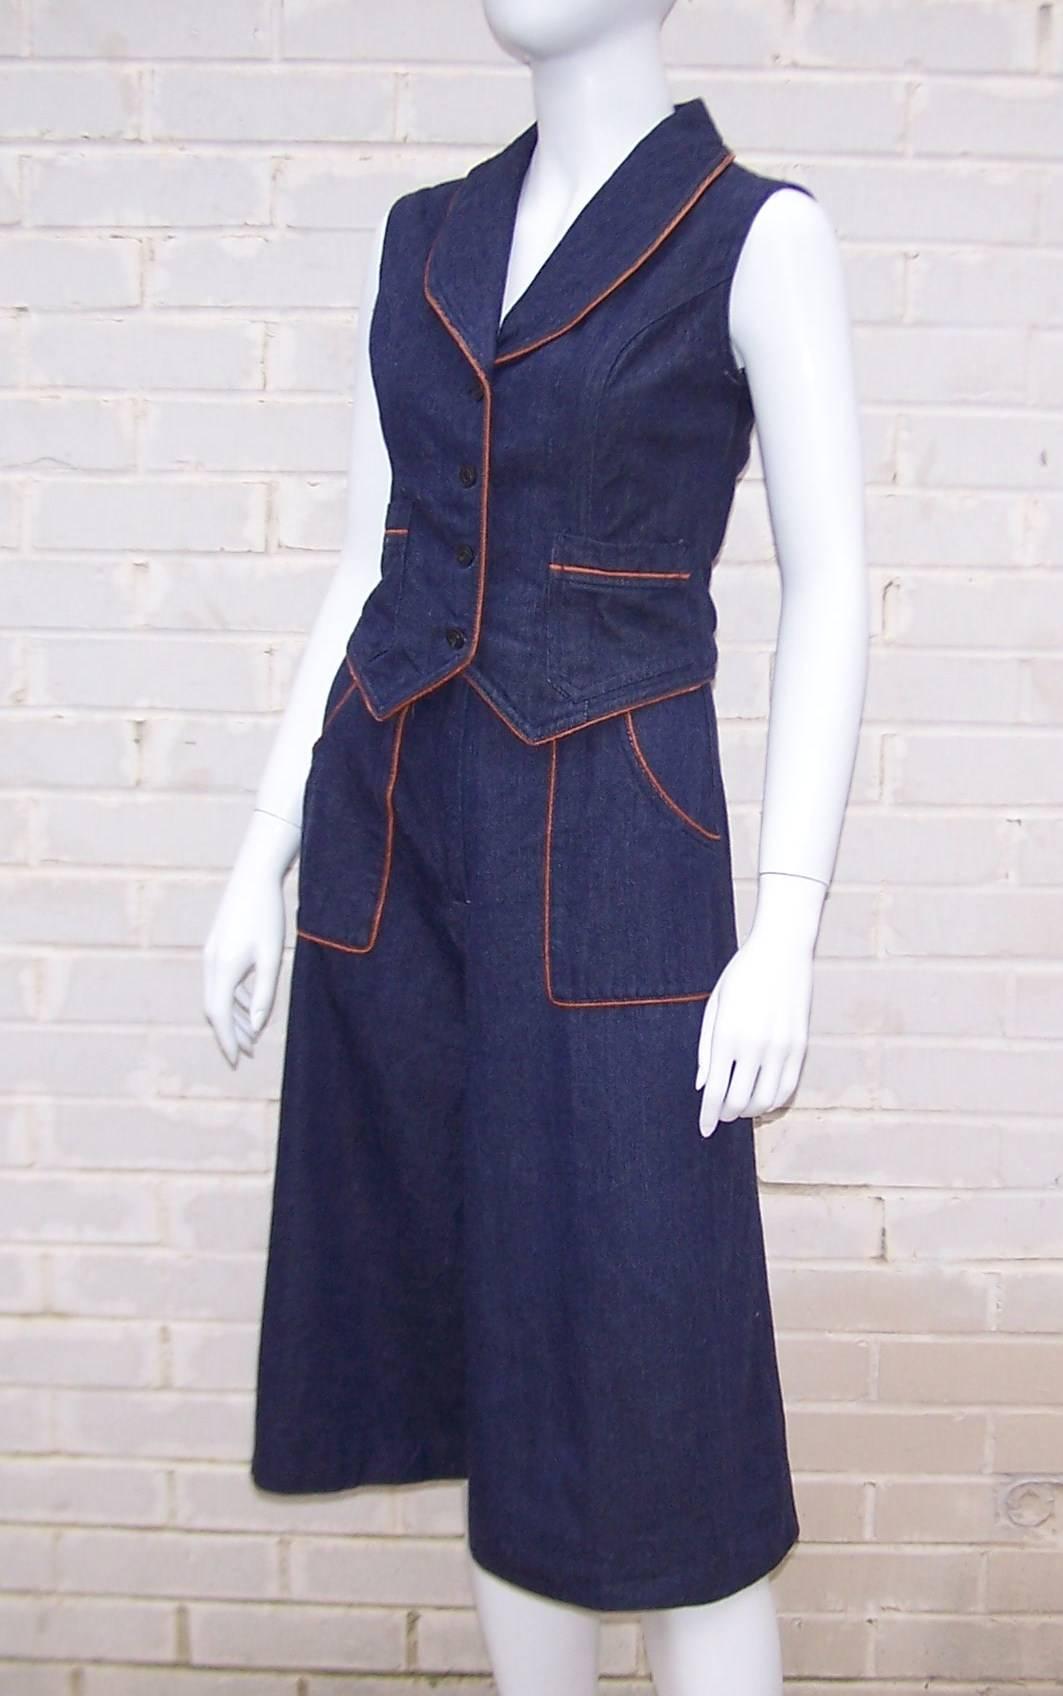 Satisfy a current trend with this fun 1970s denim gaucho pants suit with coordinating vest.  Both pieces are a dark wash denim with contrast faux leather piping.  The gaucho pants have a high waist with large front pockets and the vest has front